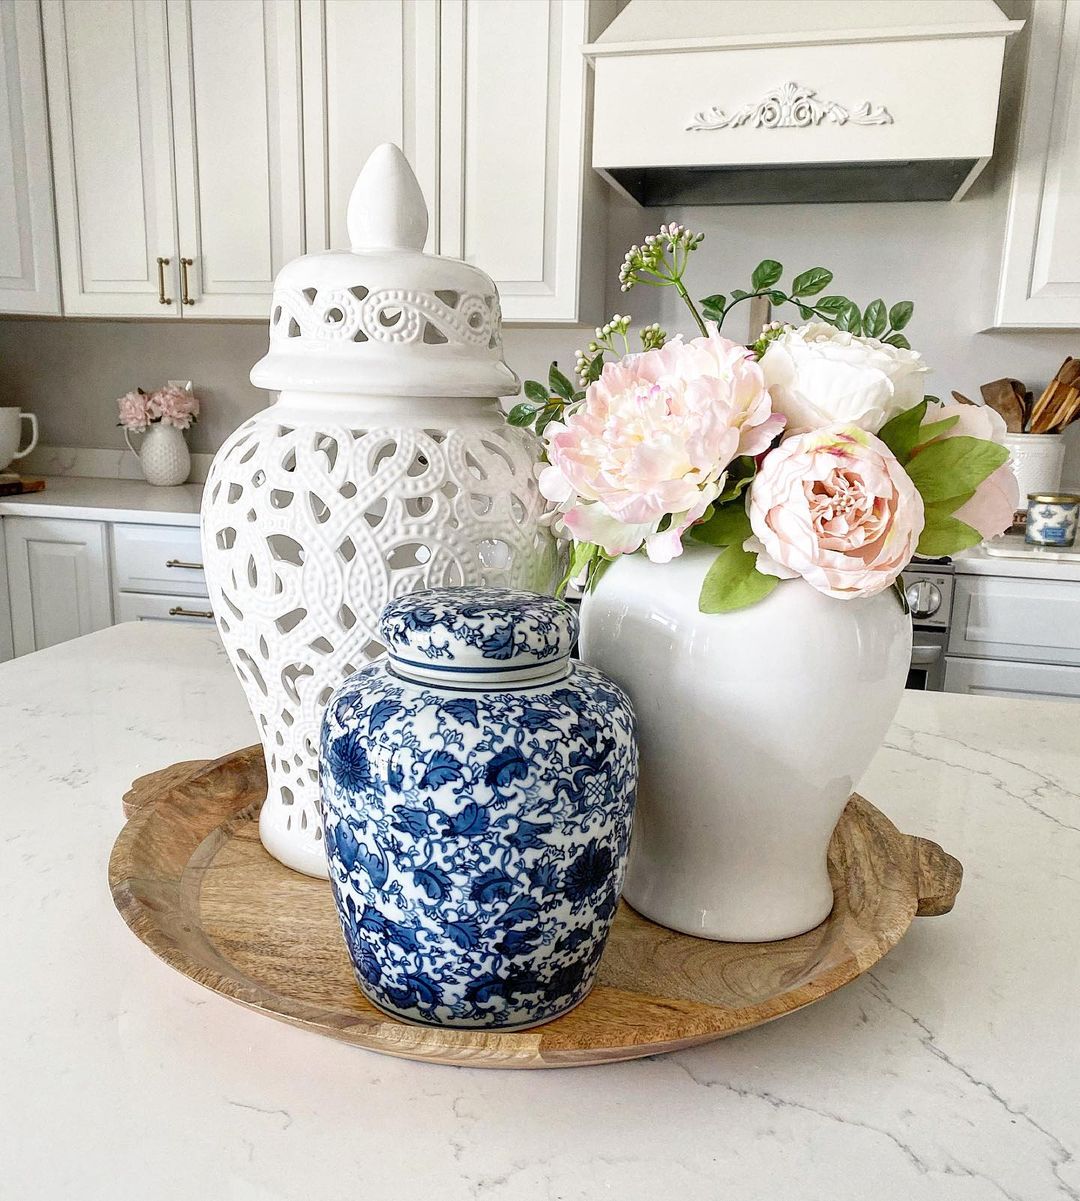 Timeless Elegance with Ceramics and Blooms